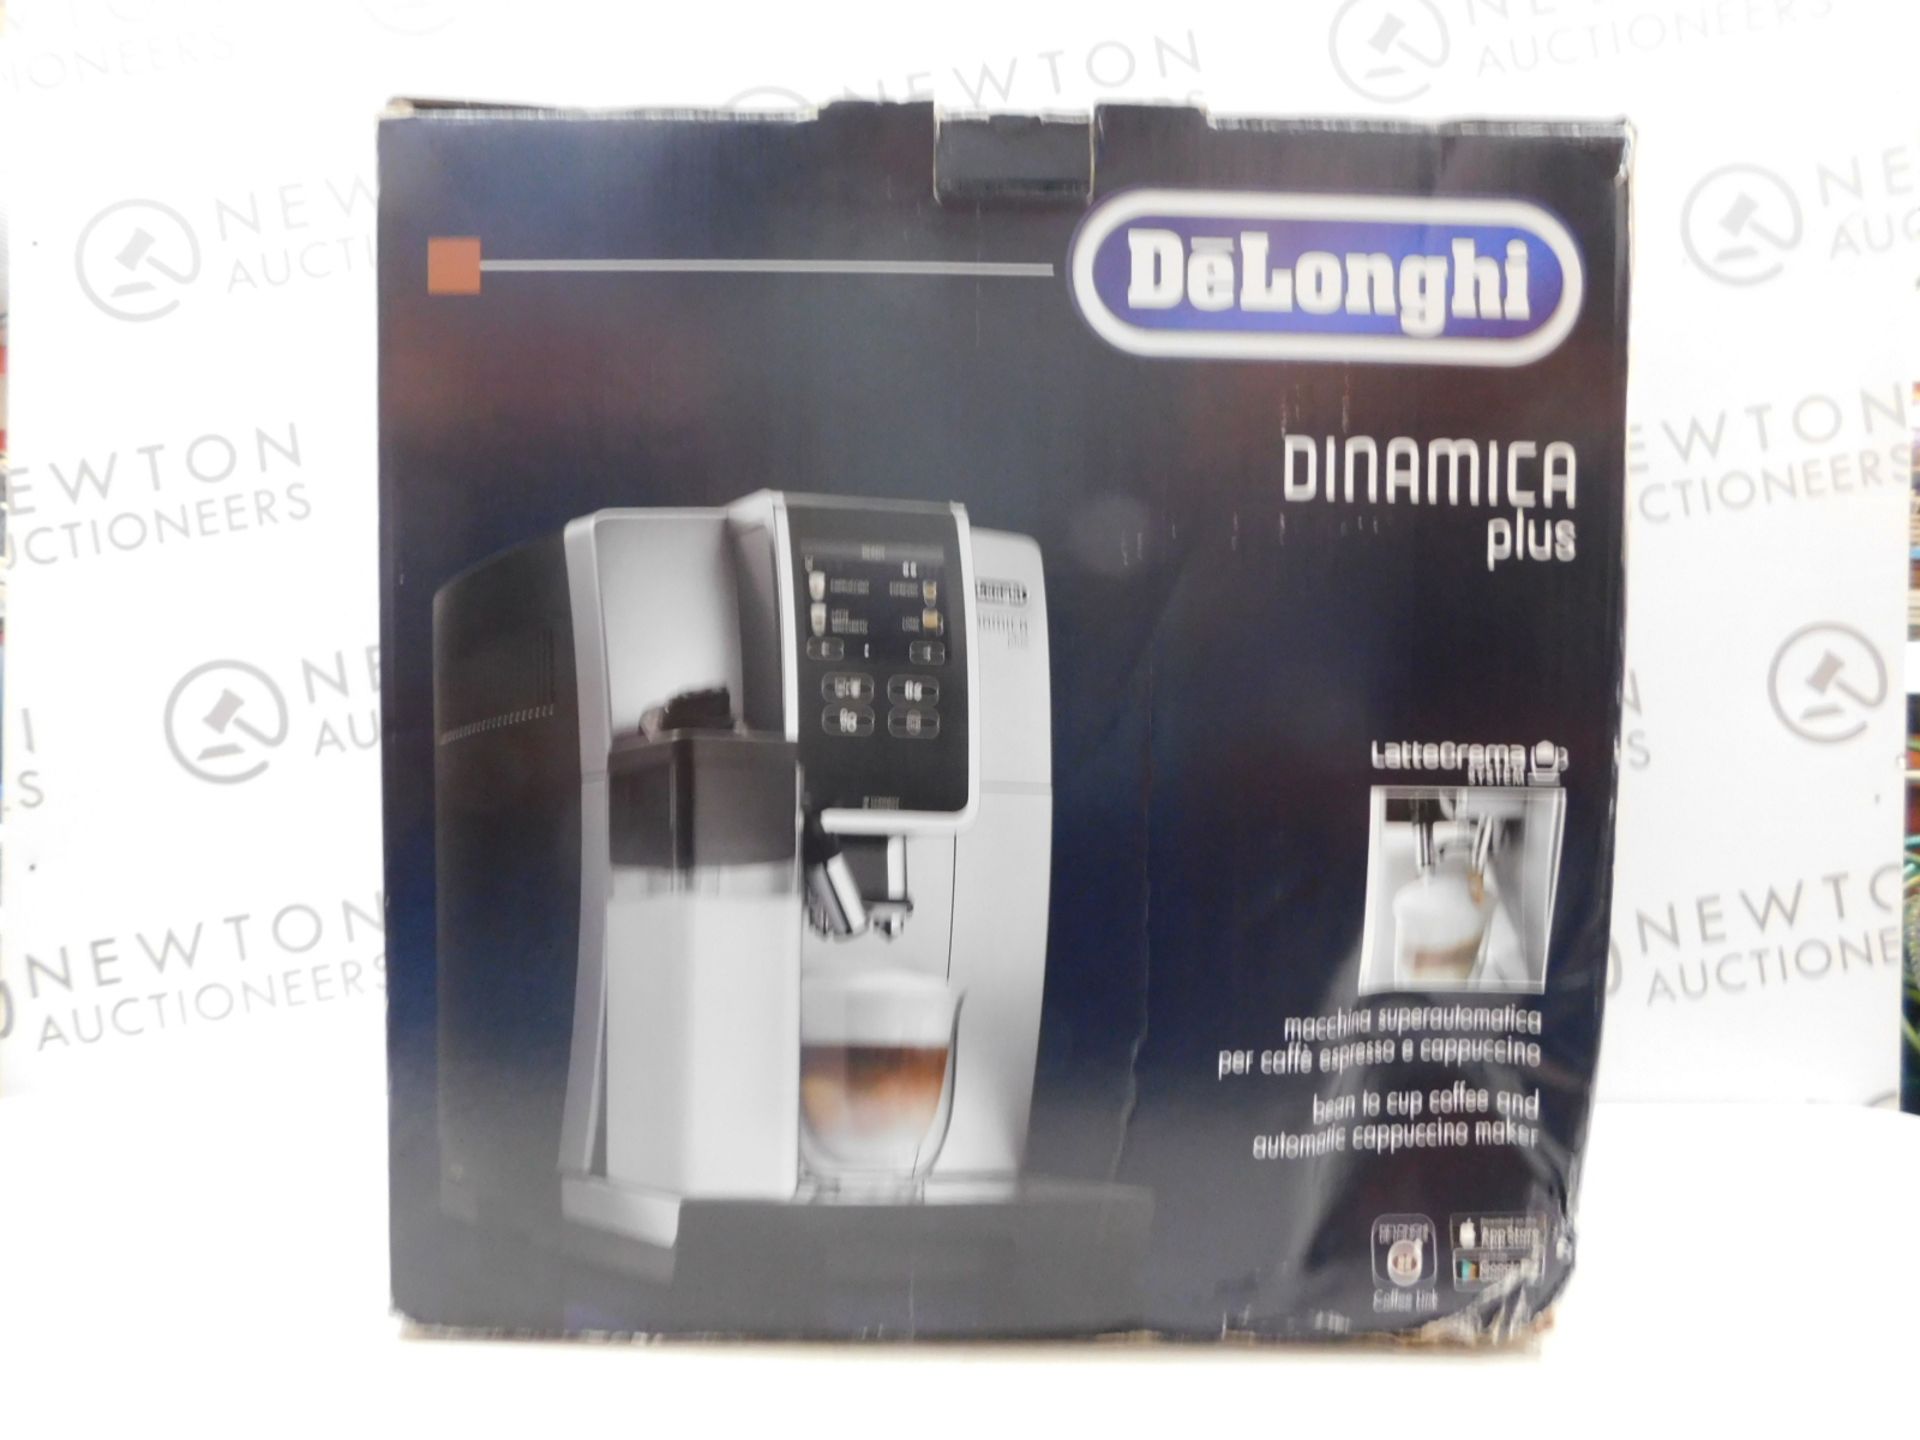 1 BOXED DELONGHI MAGNIFICA BEAN TO CUP COFFEE MACHINE ECAM25.462.B RRP Â£899 - Image 2 of 2